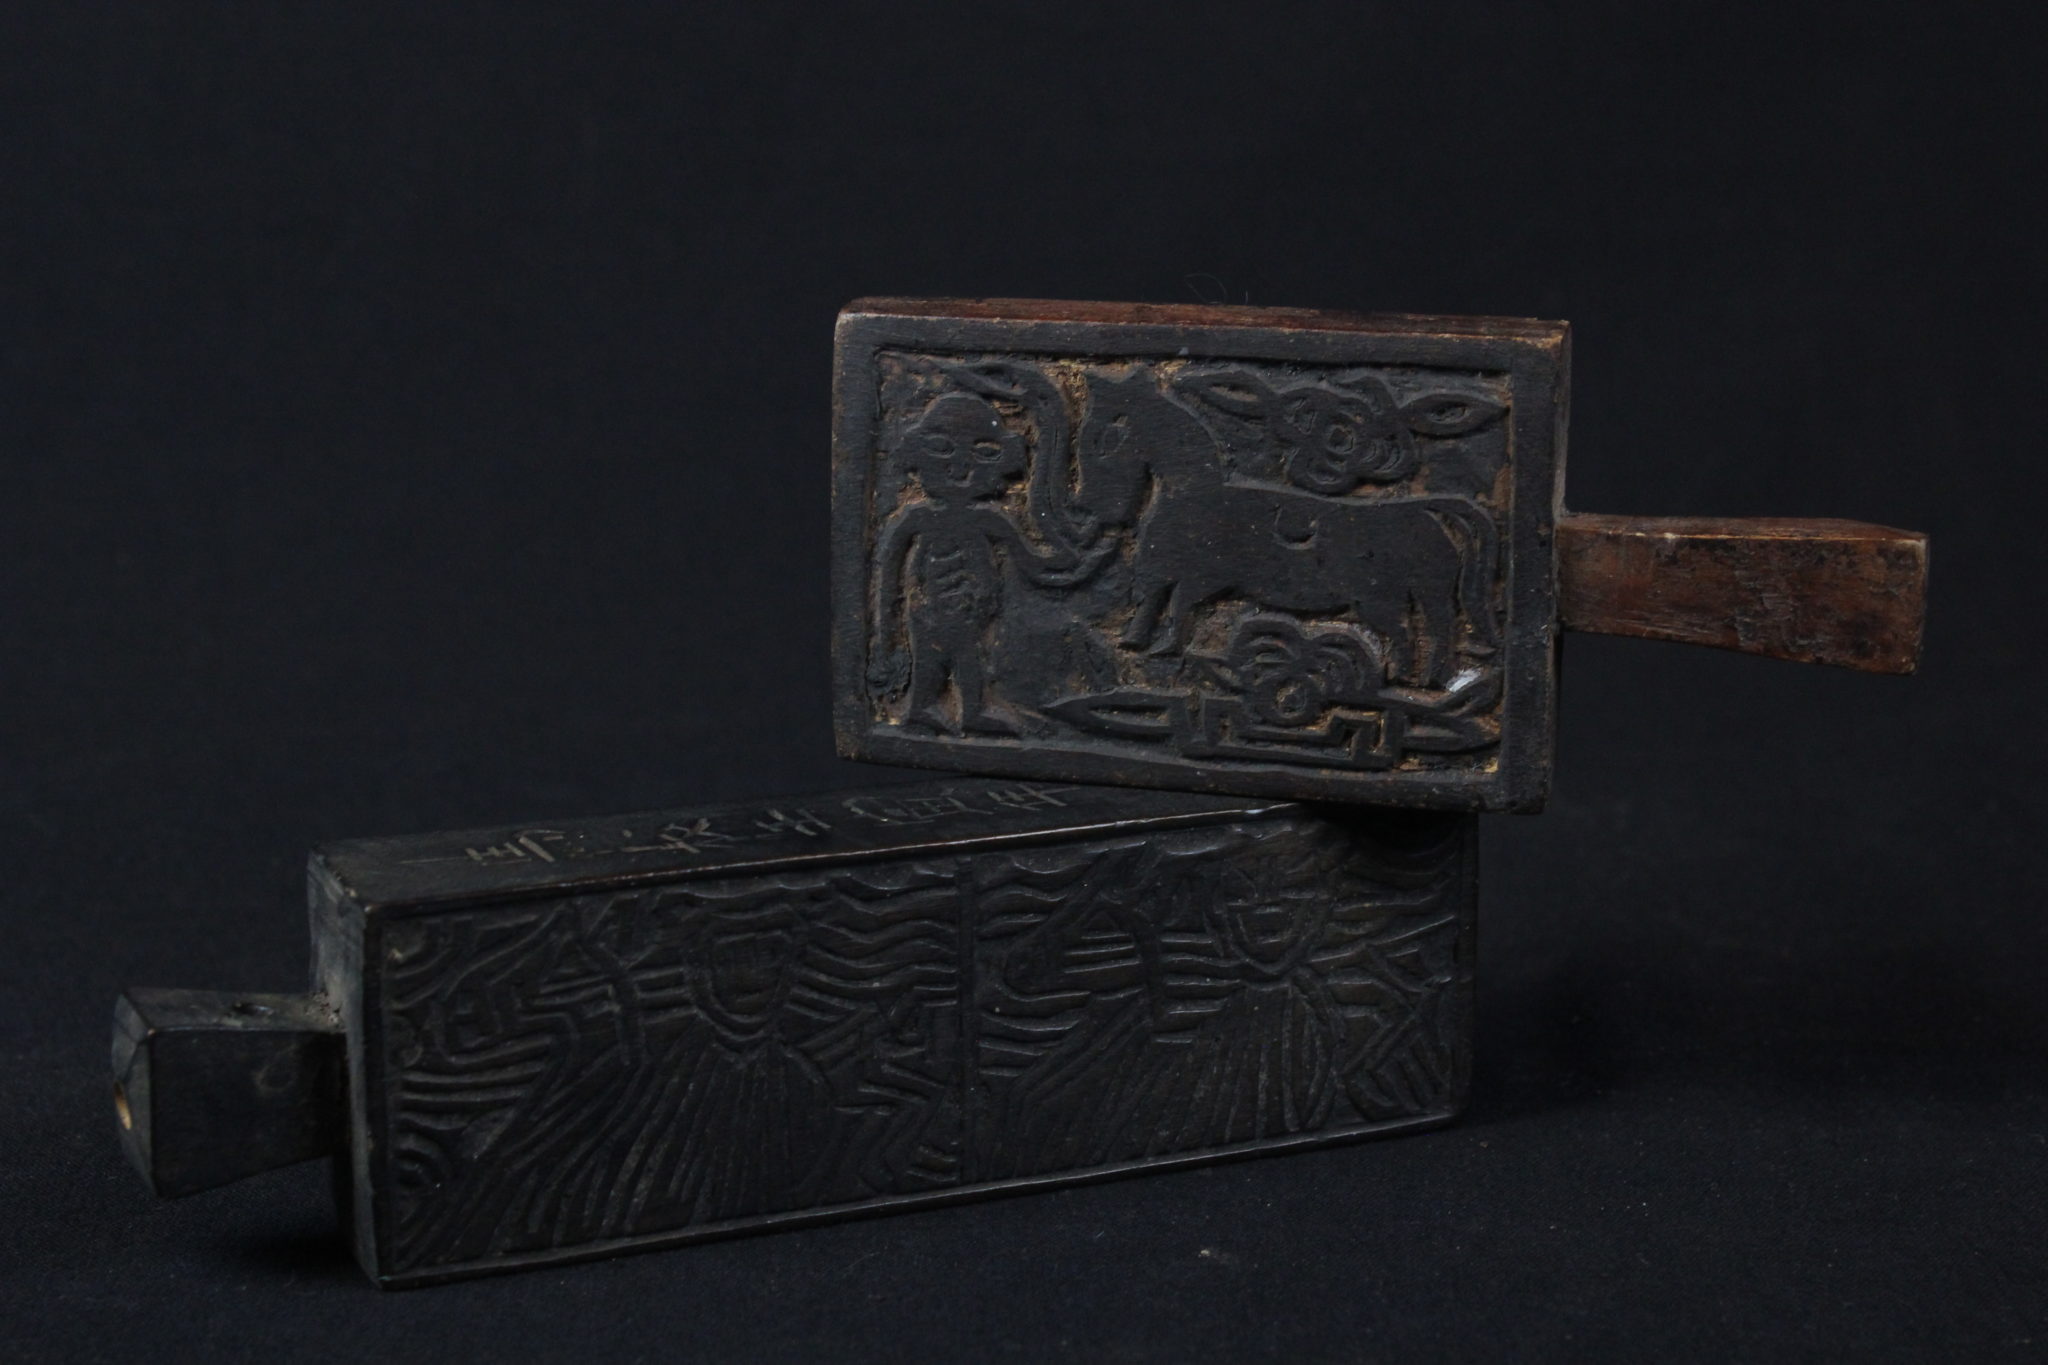 Shaman Printing Block, Tuyen Quang province, Vietnam, Mid 20th c, Printing blocks are important shaman tools for creating talismans and ghost money to burn as offerings to deities. They were stamped on paper or on envelopes to mark the contents as holy. (Top - 2 ¼” x ½’ x 5’, $110.); (Bottom, 1 ¾” x 6 ¼” x 1”, $90.)